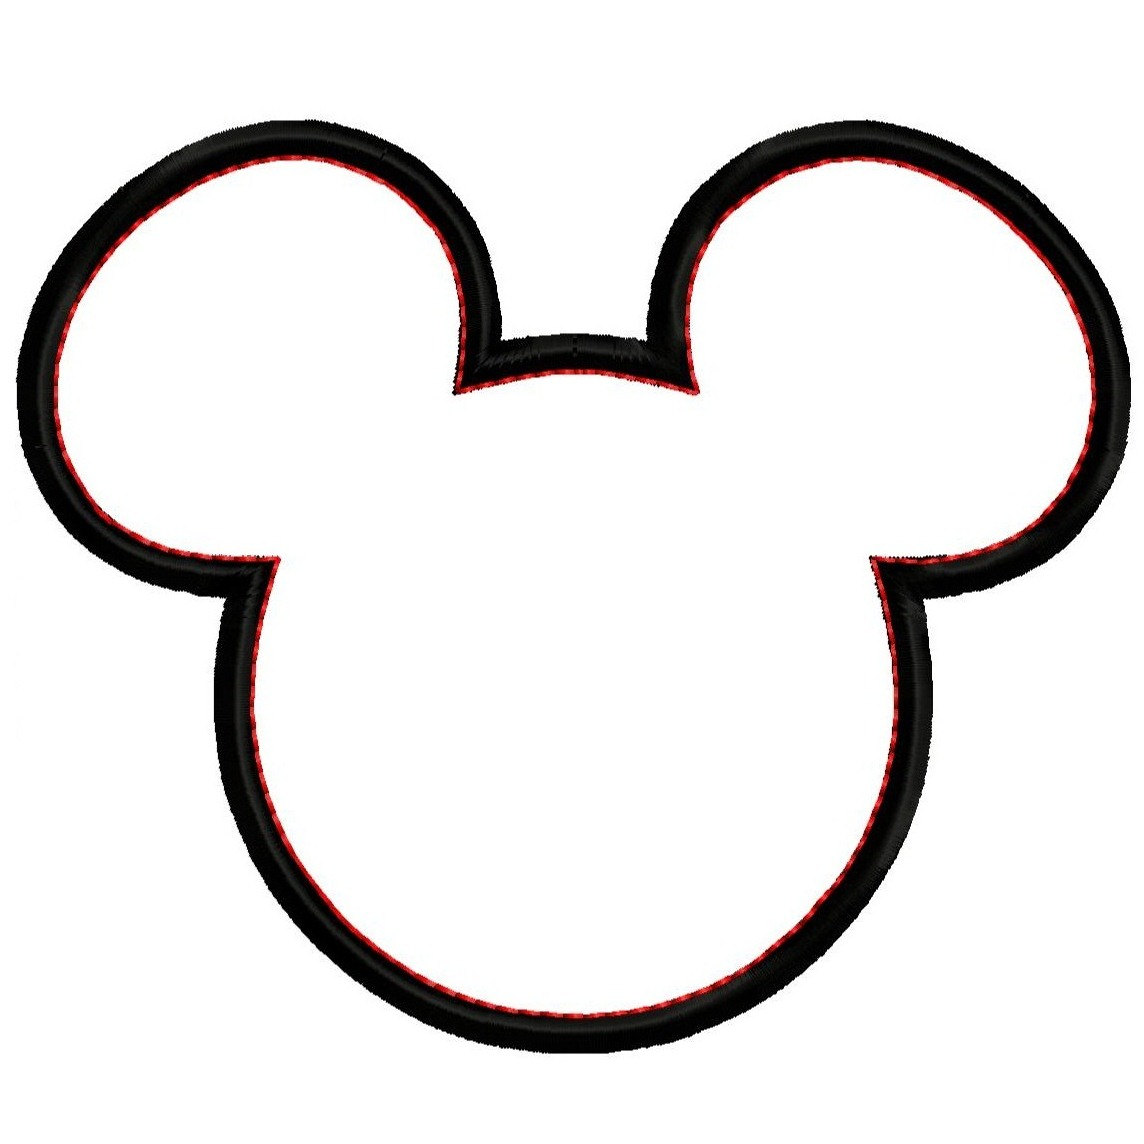 Mickey Mouse Page Border.